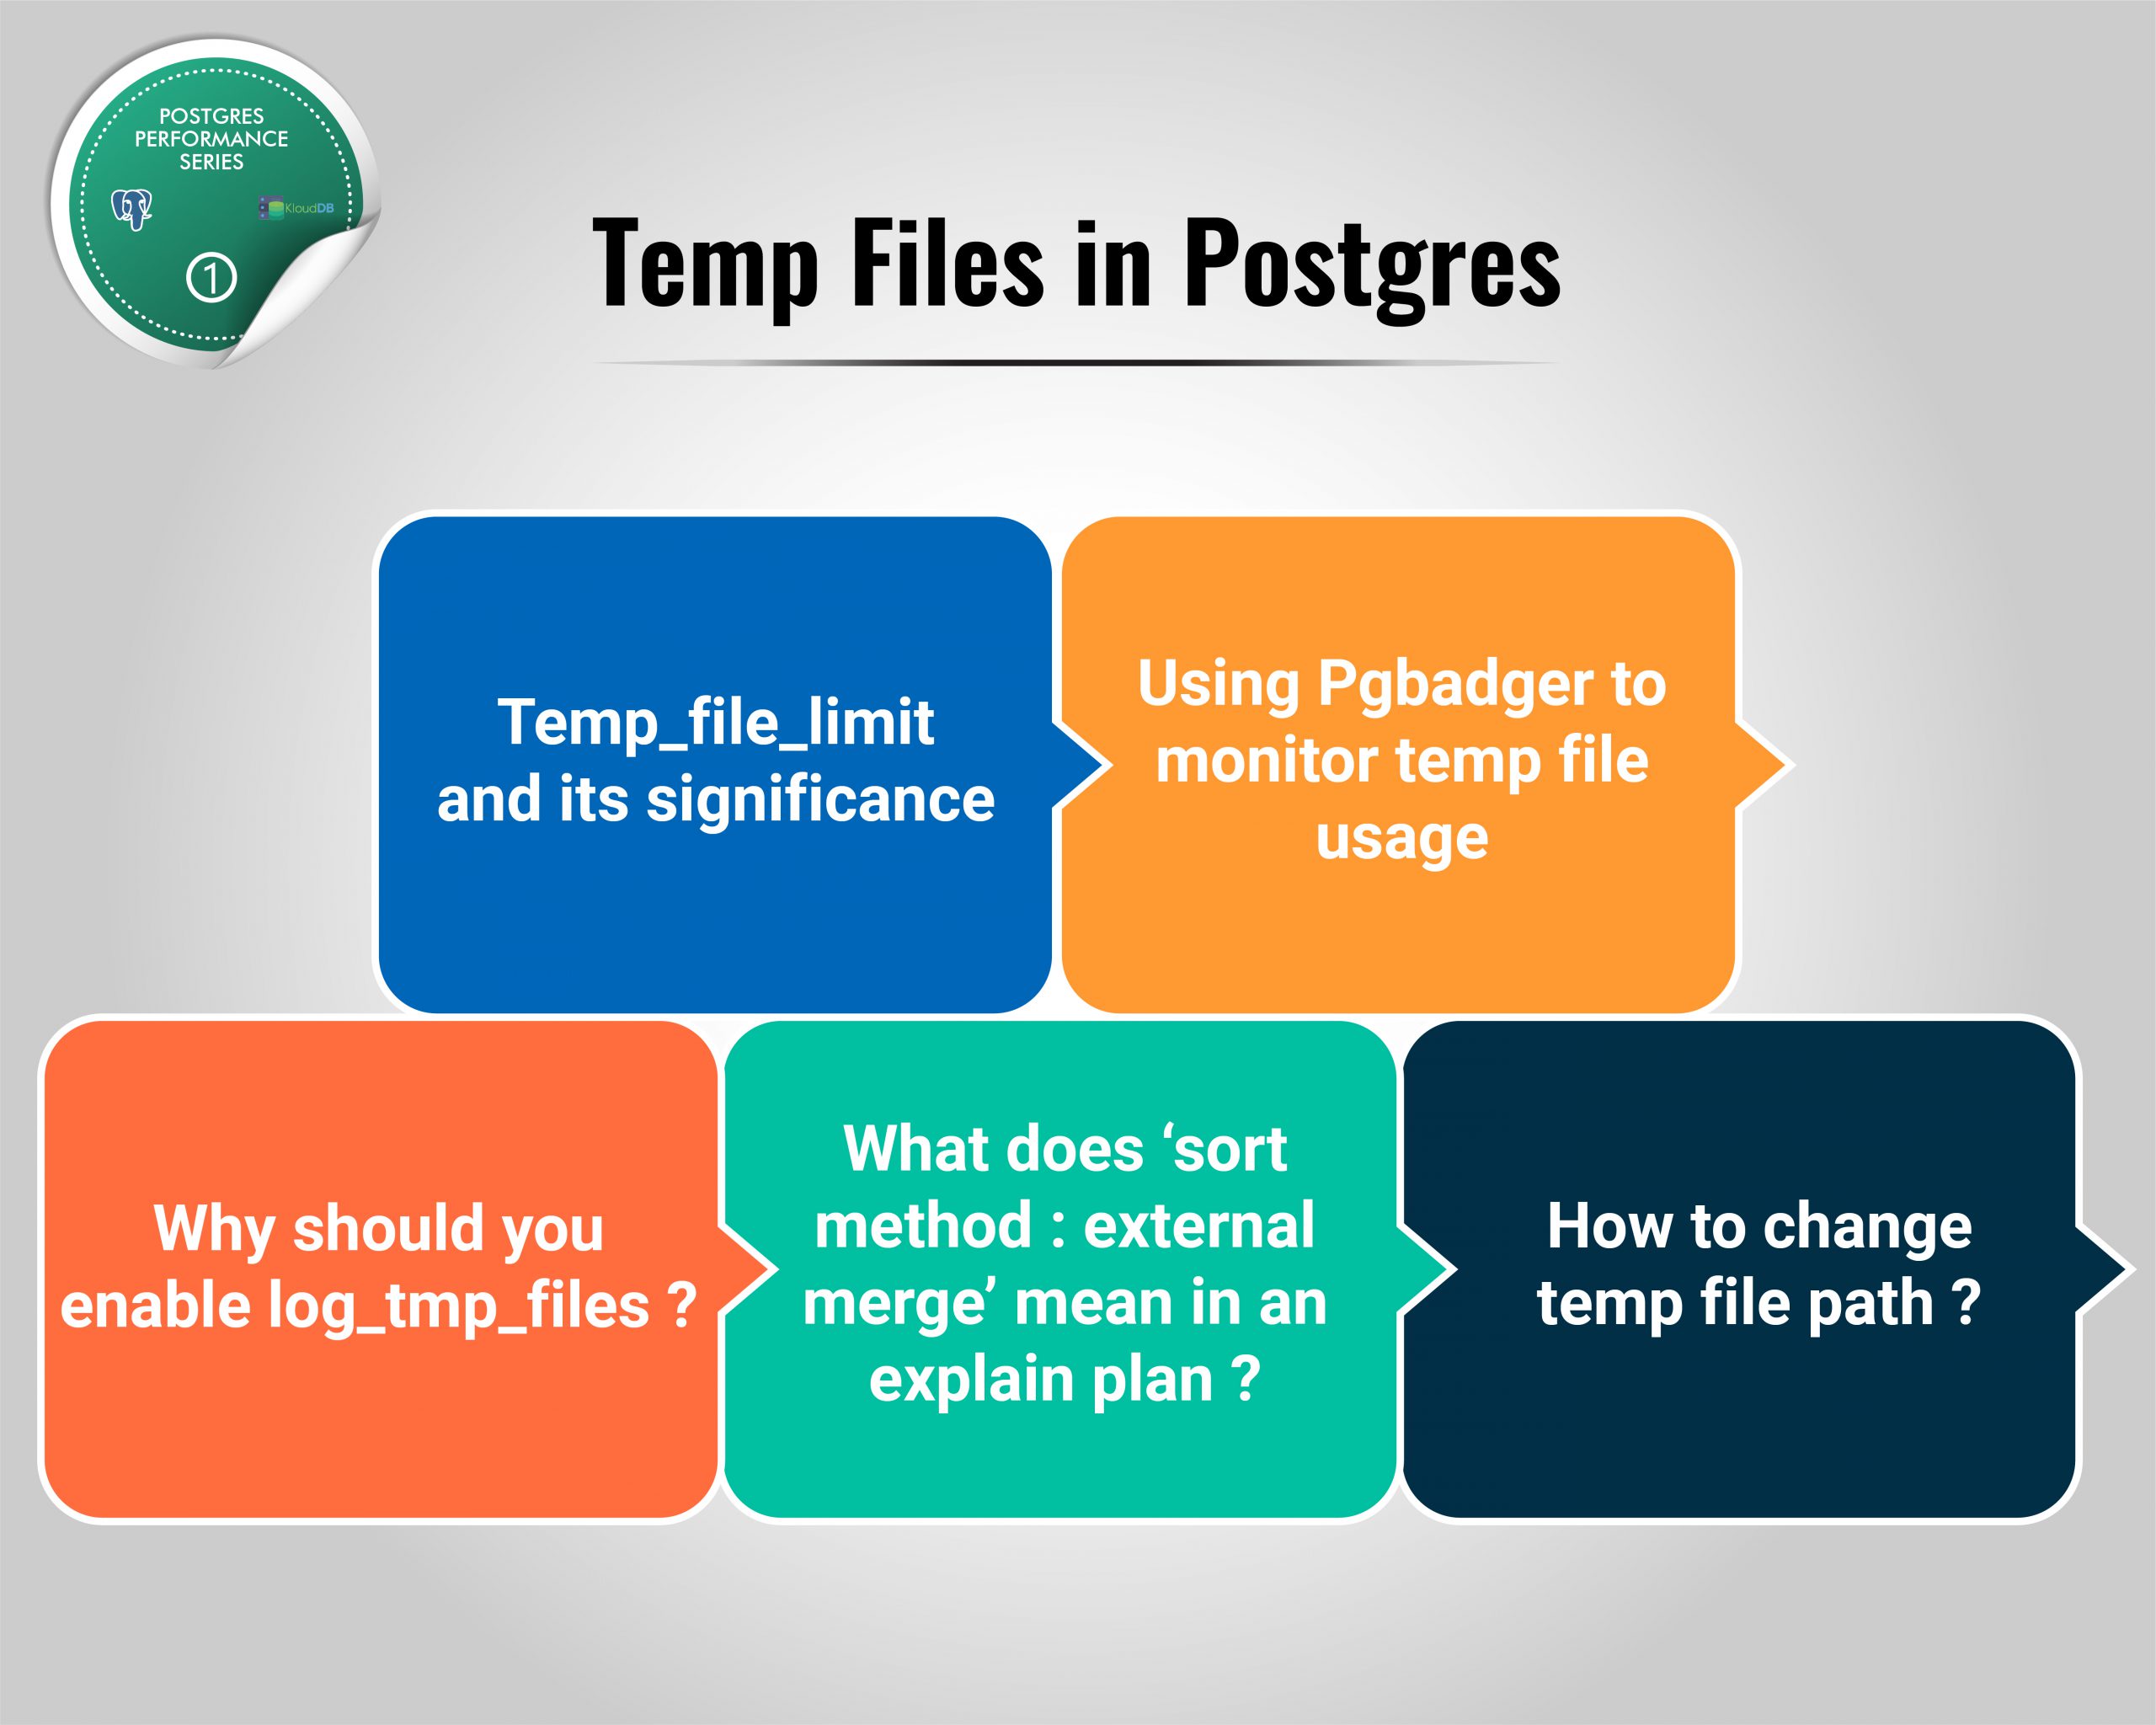 Temporary files in PostgreSQL - Steps to identify and fix temp file issues